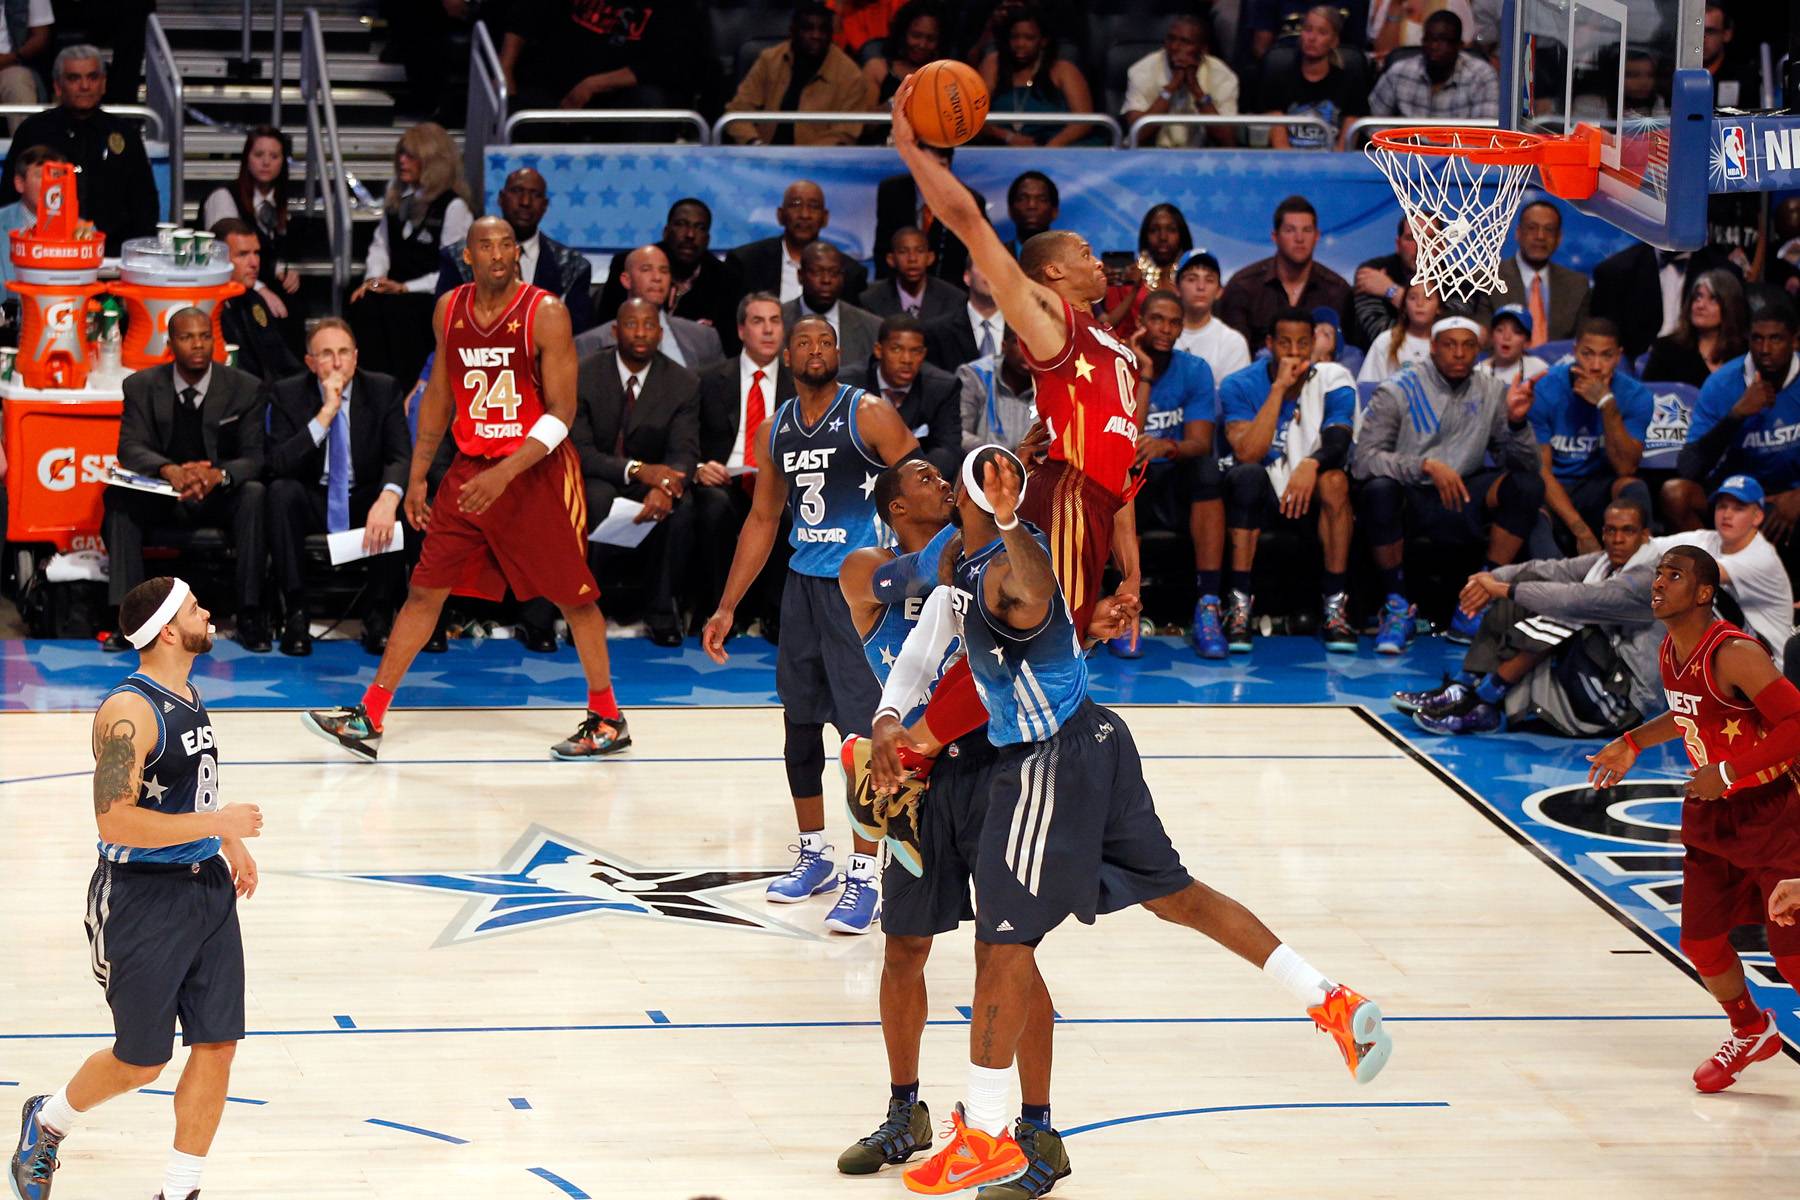 Major Air - Russell Westbrook (0) of the Oklahoma City Thunder attempts a dunk.&nbsp;(Photo: Mike Ehrmann/Getty Images)